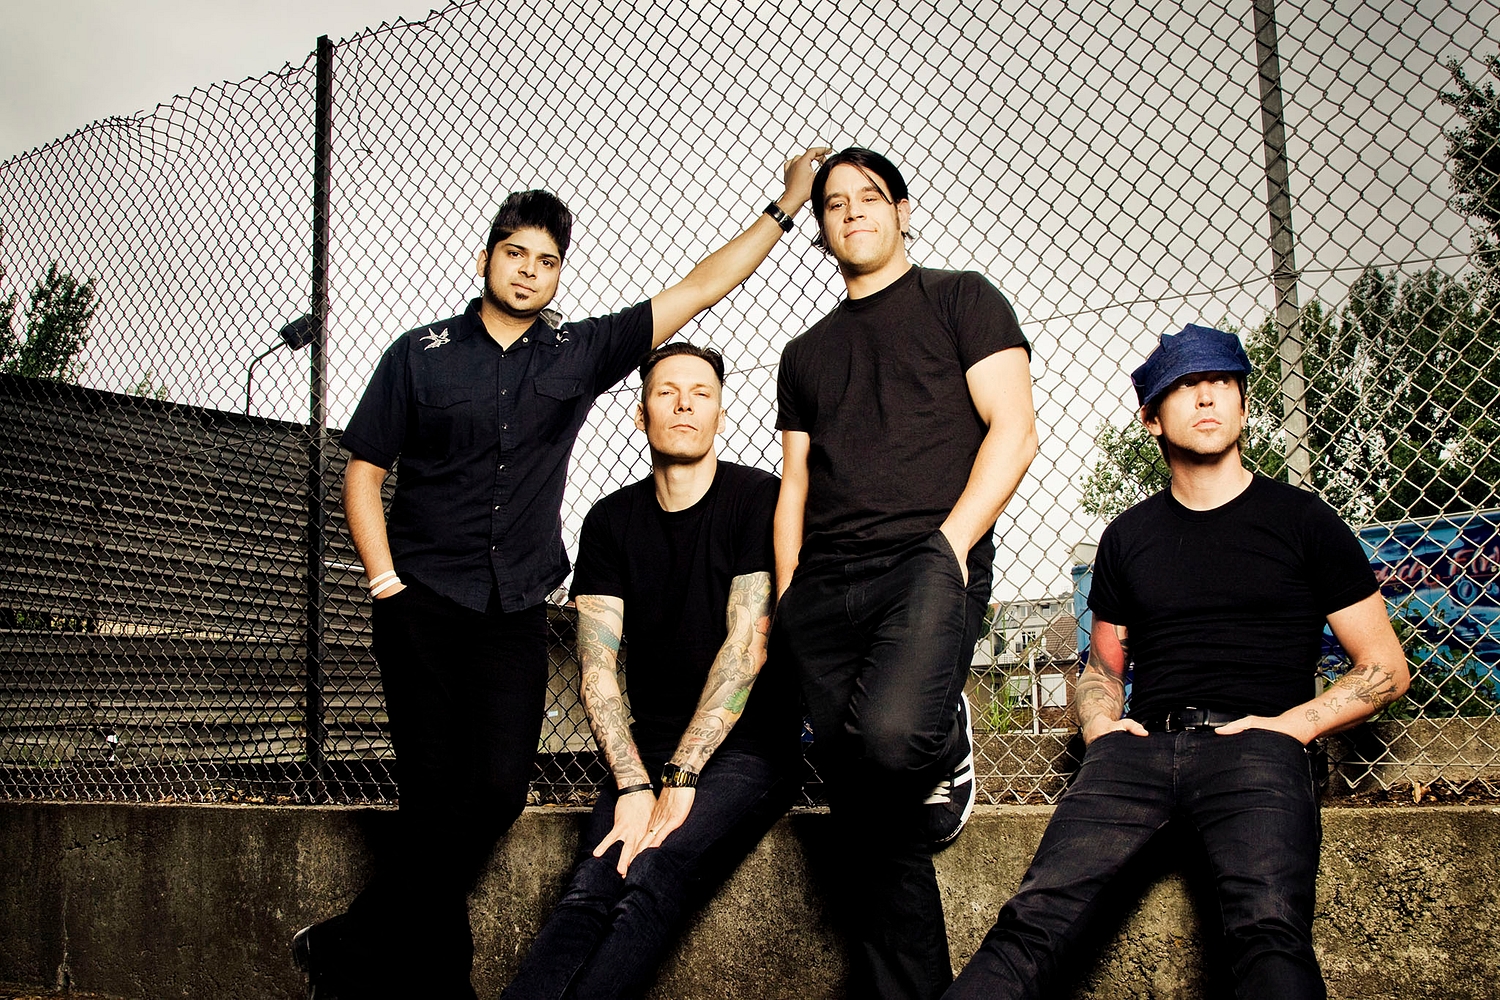 Billy Talent tease fans with cryptic website update